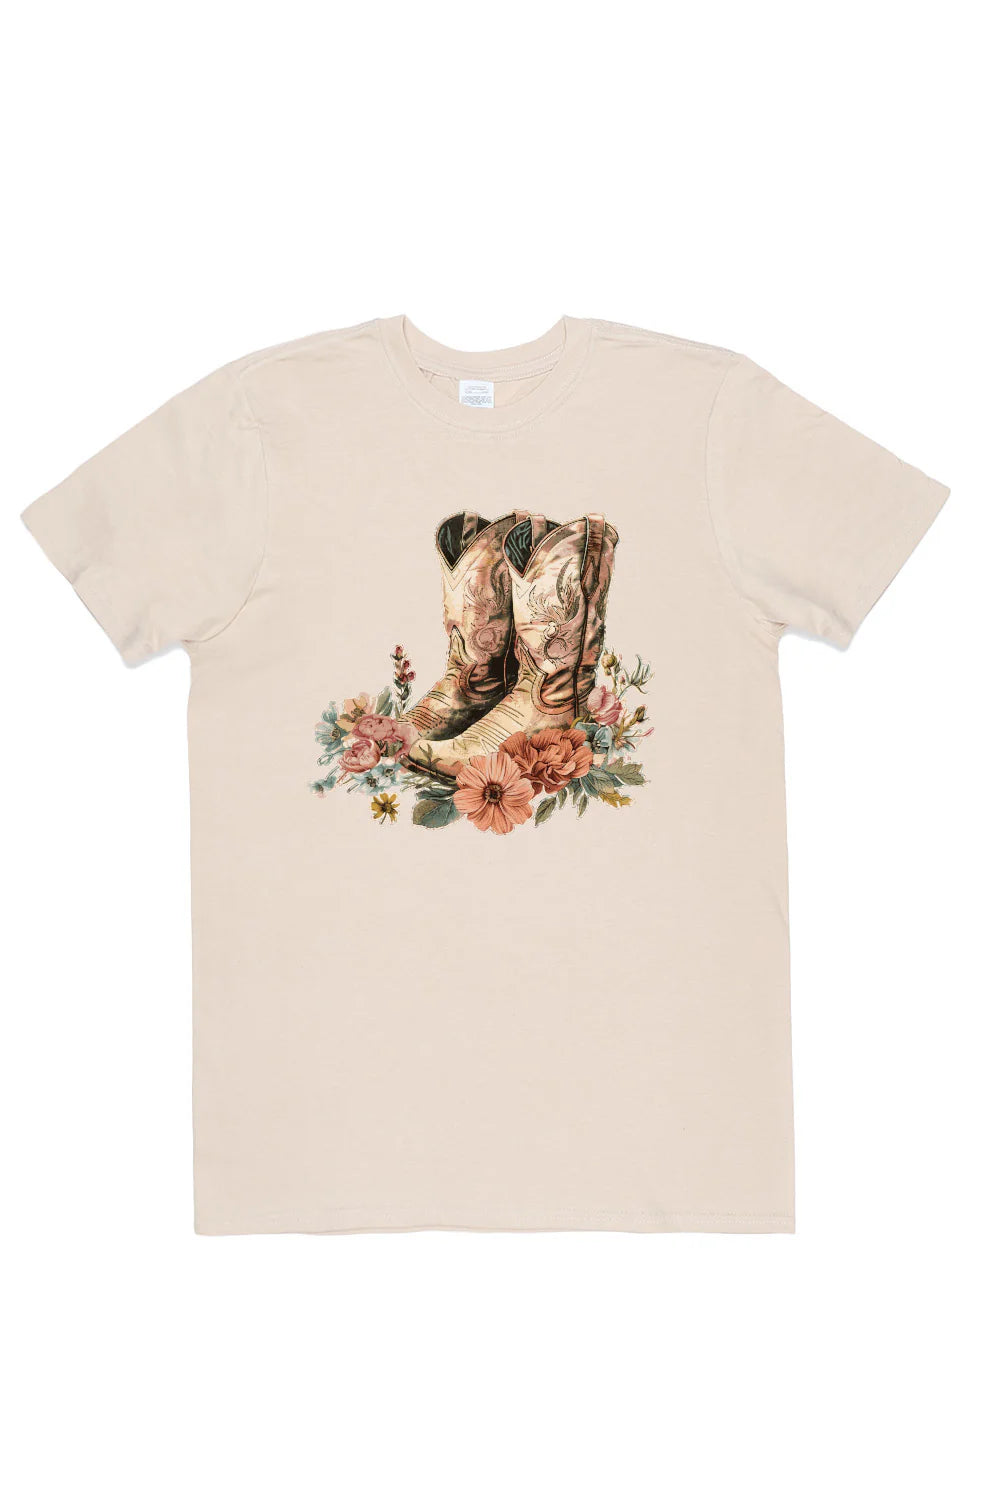 Cowboy boots with flowers T-Shirt